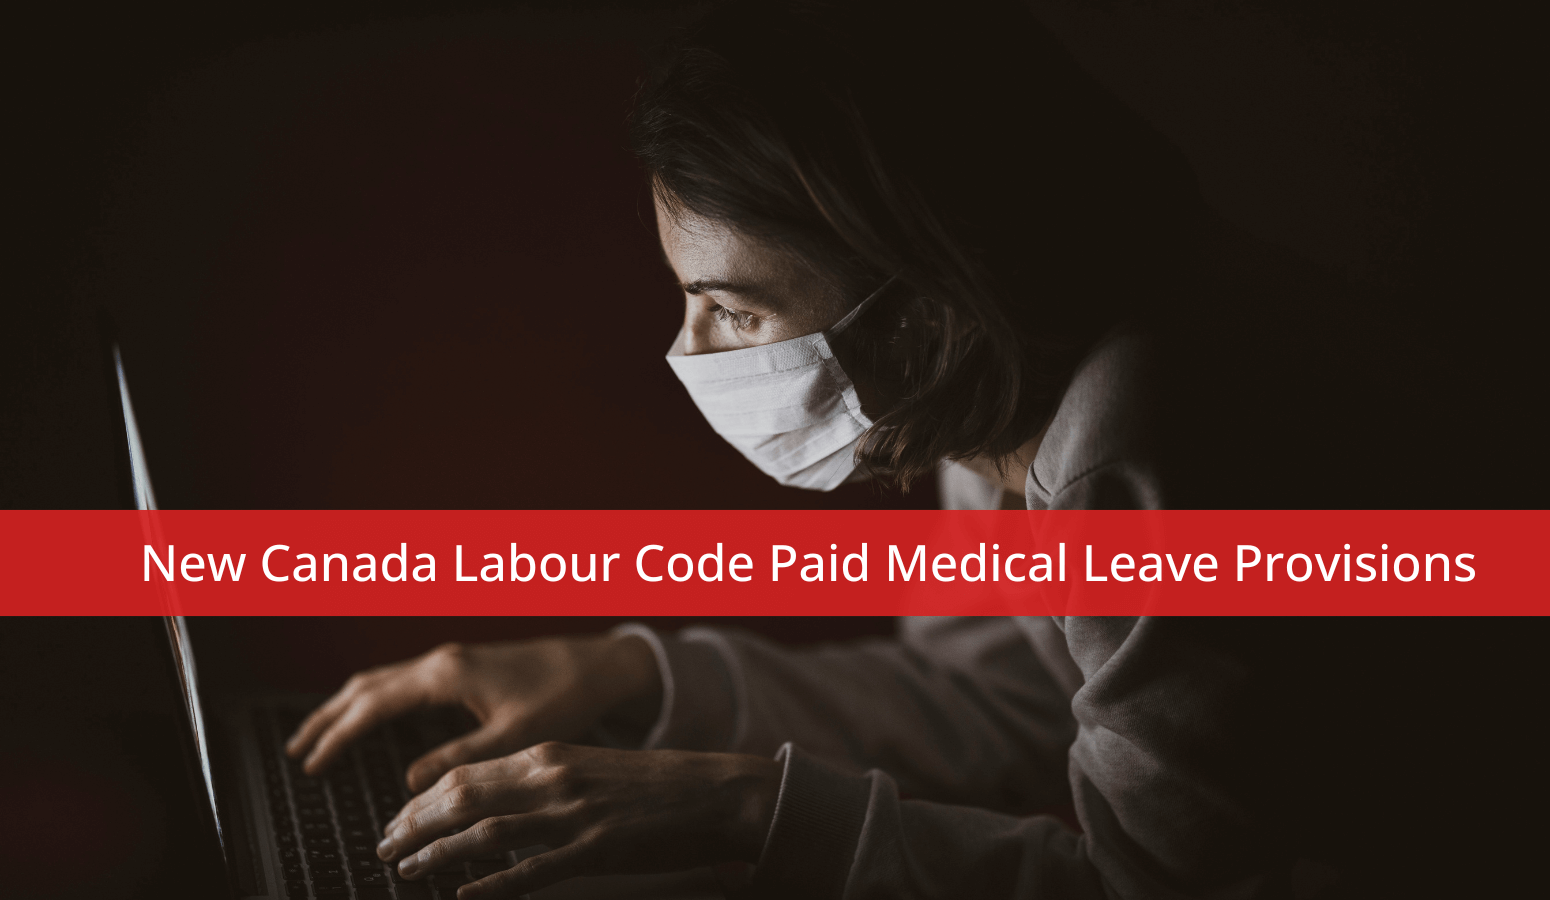 Featured image for “New Canada Labour Code Paid Medical Leave Provisions”